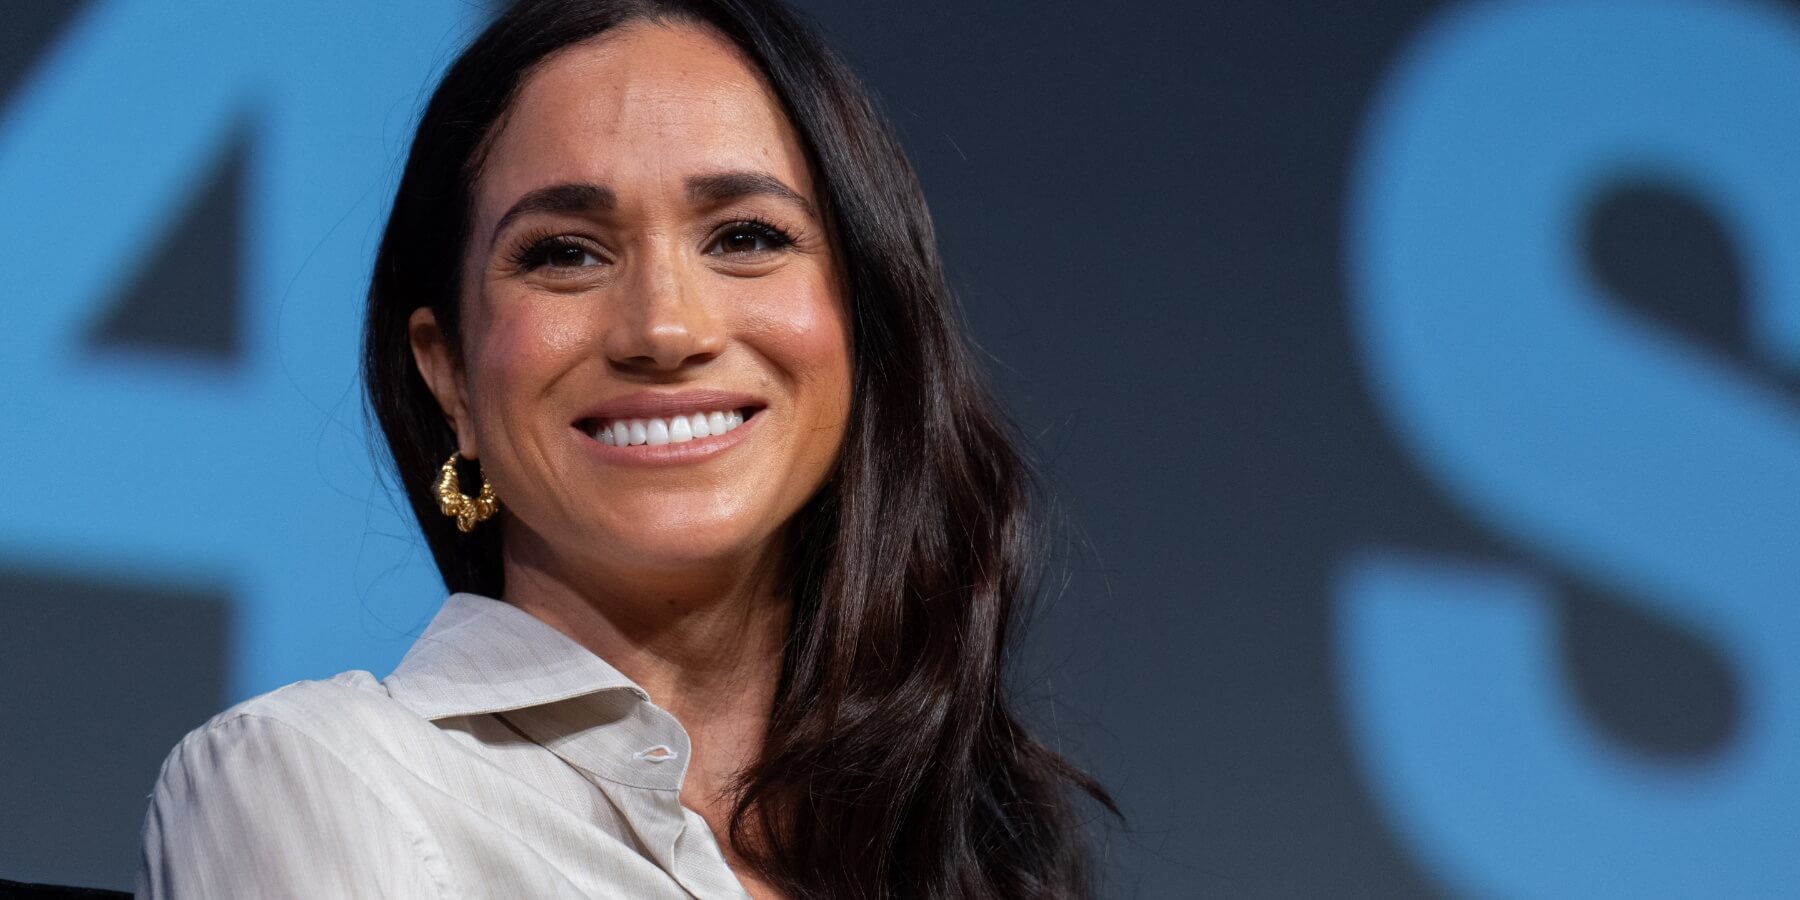 Meghan Markle: ‘Threw It All Away’ for Bold New Lifestyle Brand: Royal Author